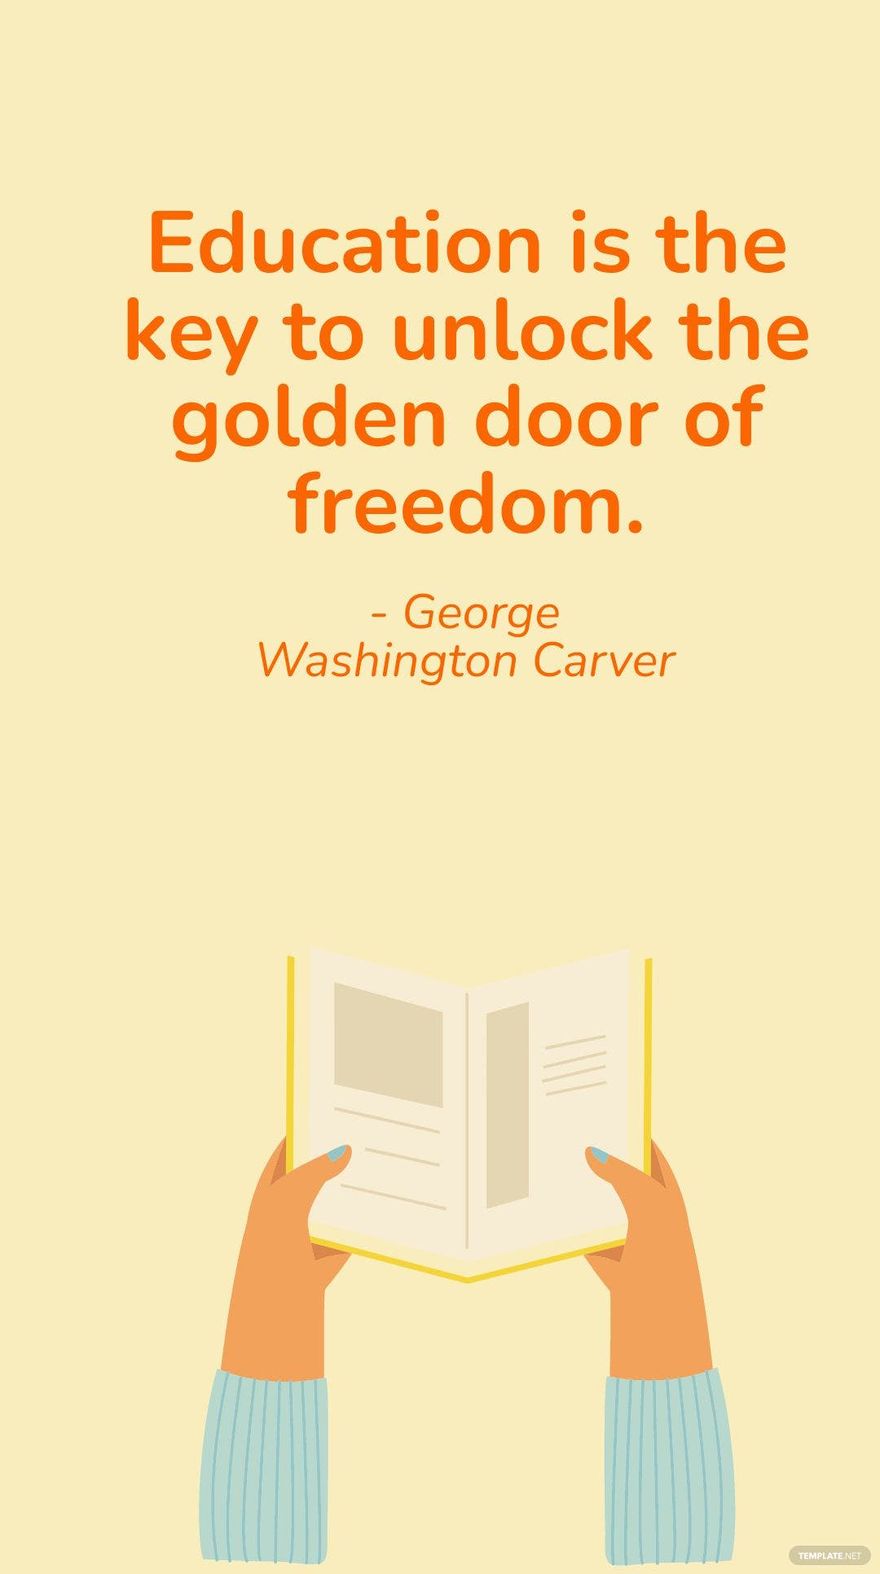 Free George Washington Carver - Education is the key to unlock the golden door of freedom. in JPG